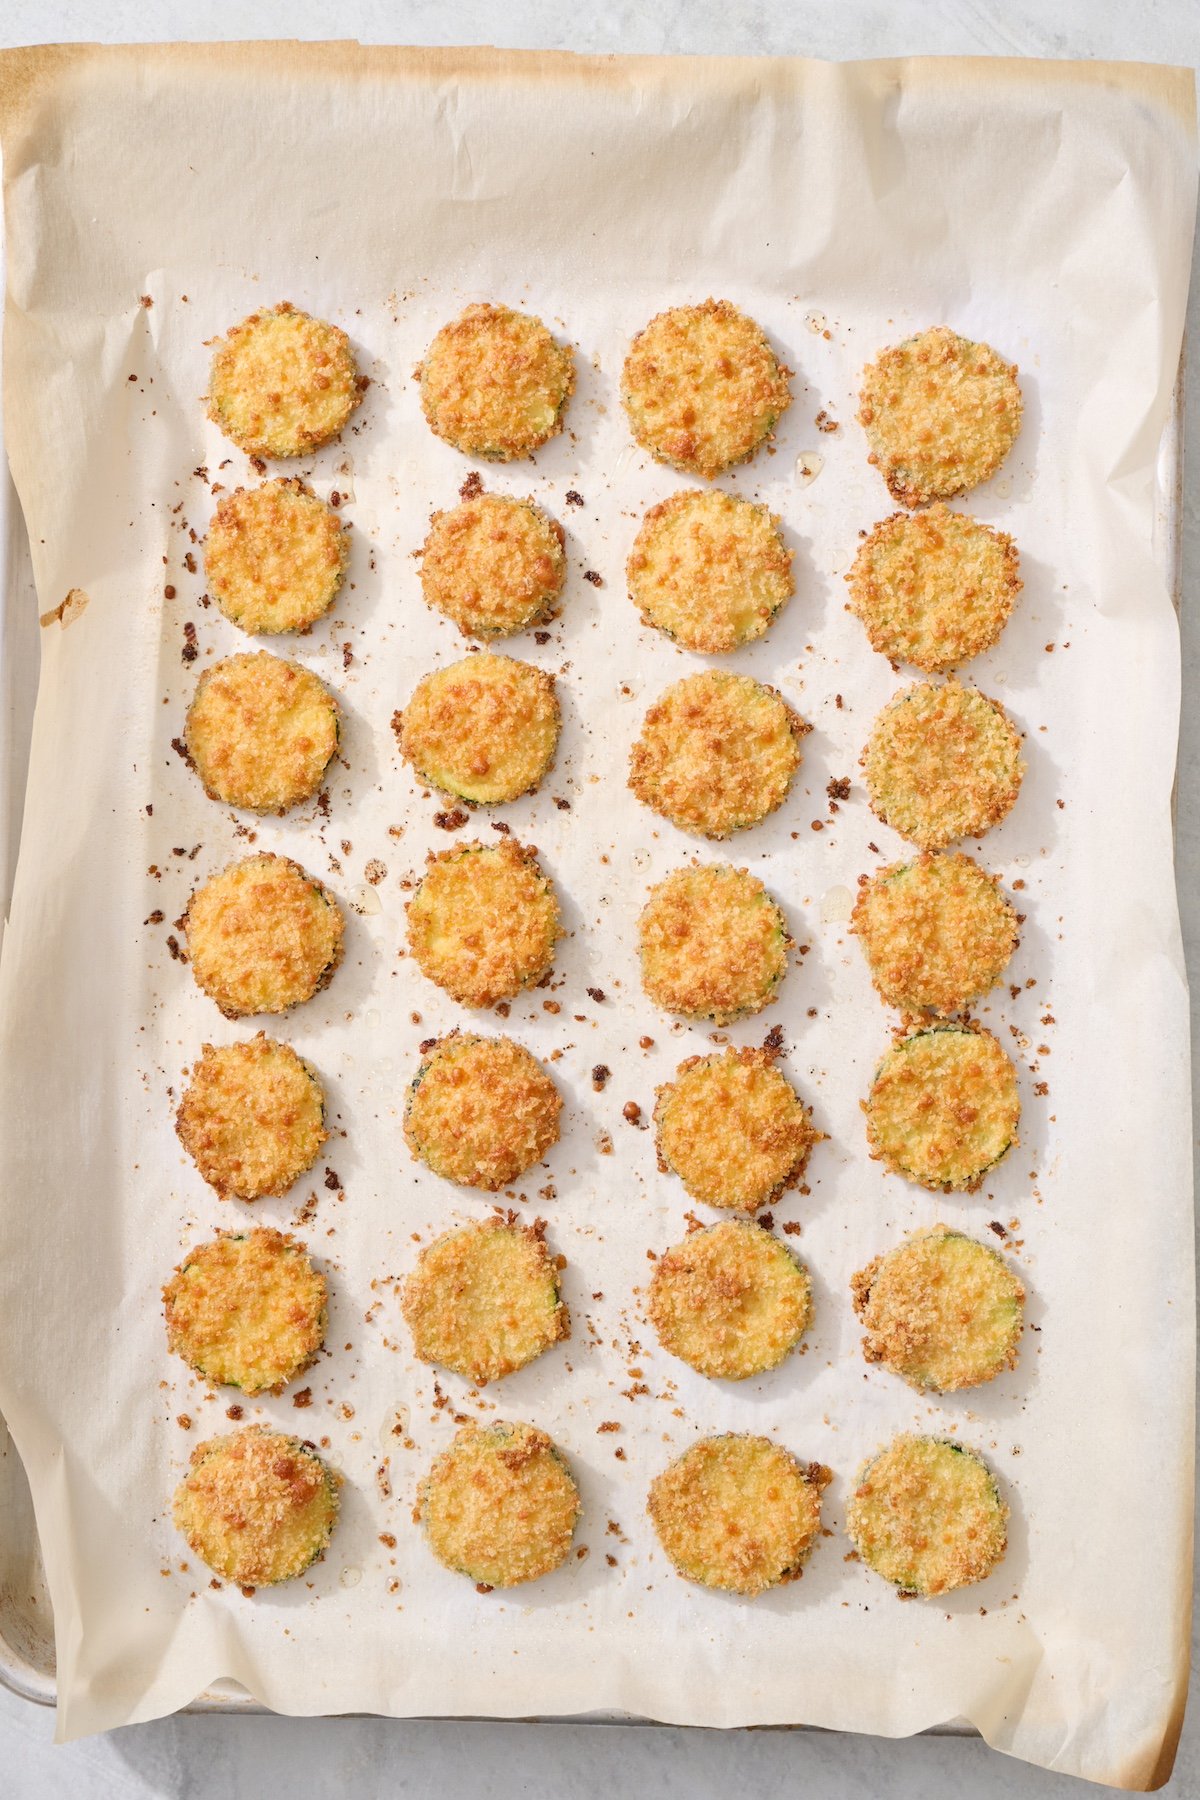 Baked zucchini coins on baking sheet.